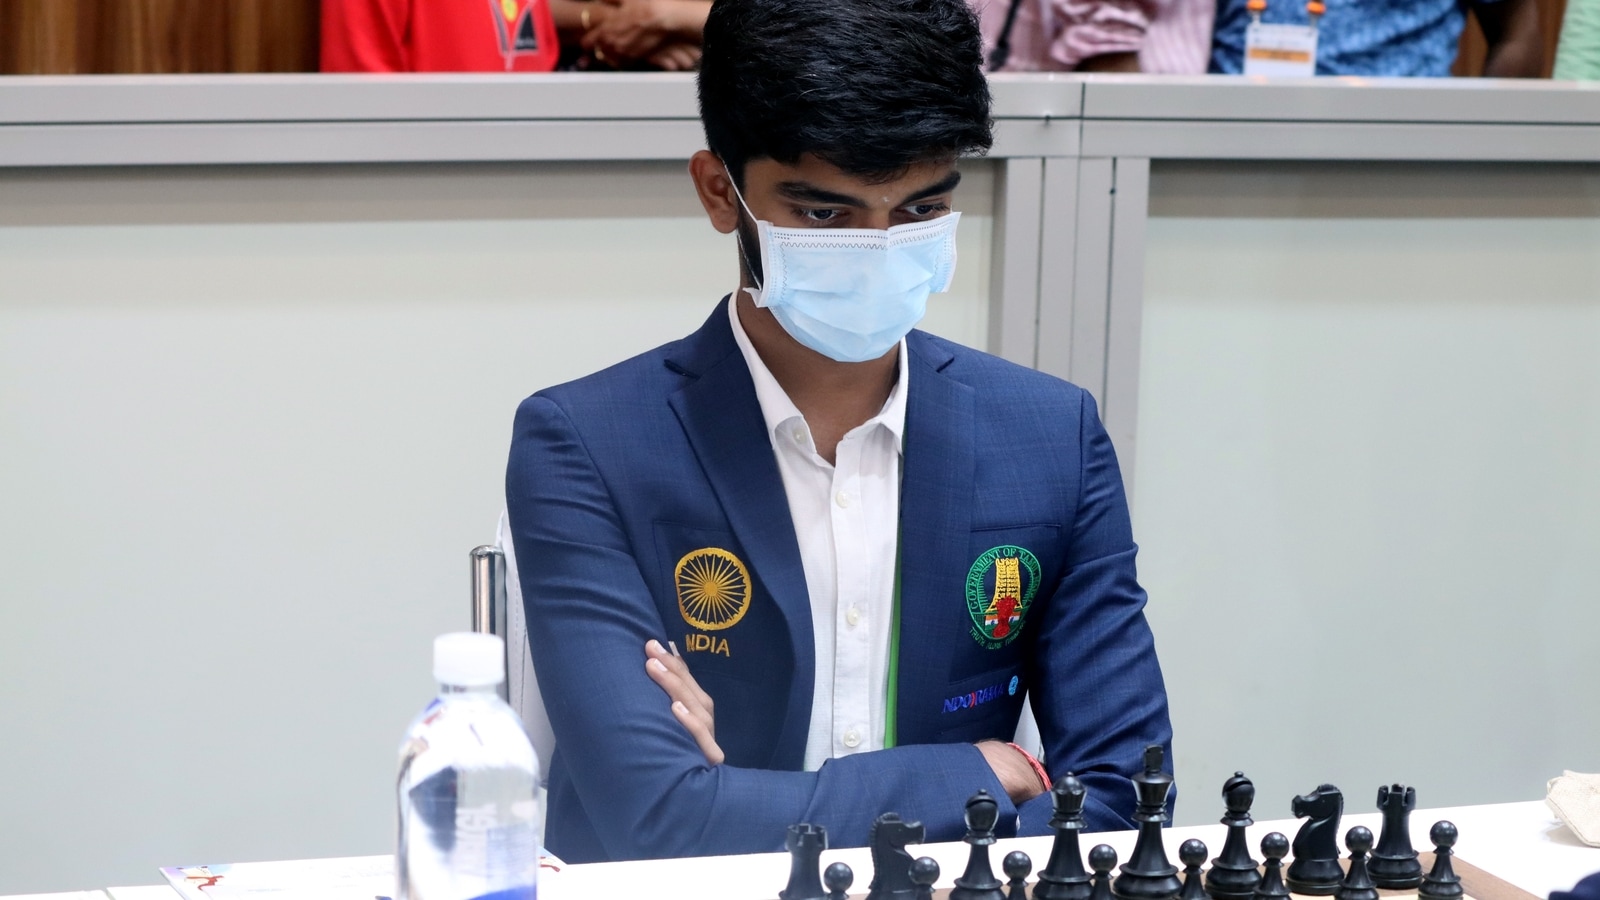 When You Realize Your Opponent Has Blundered, Praggnanandhaa vs Raunak